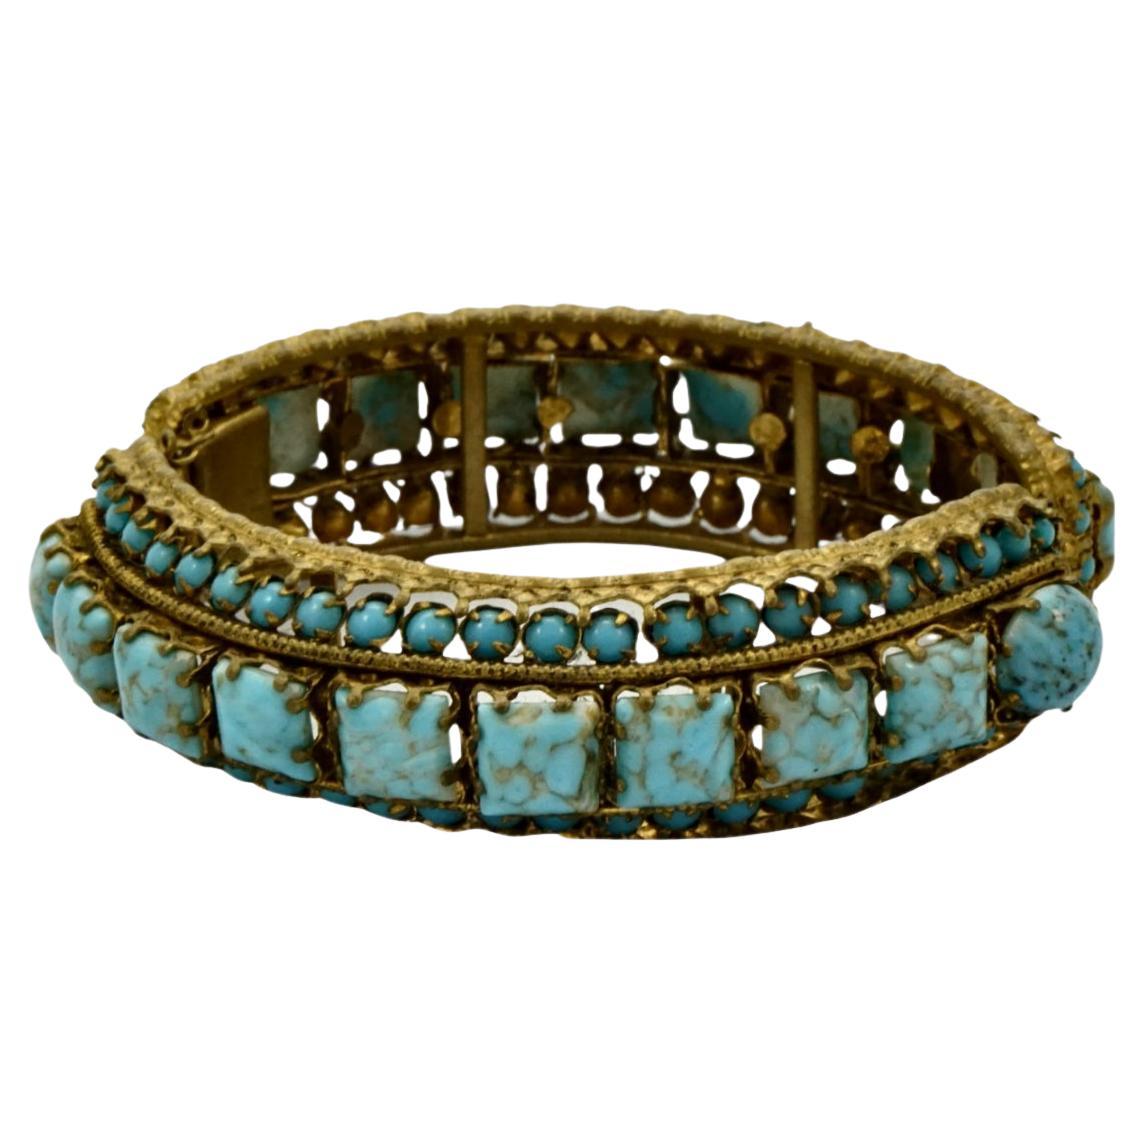 Gold Plated and Black Enamel Bangle Bracelet with Faux Turquoise Stones For Sale